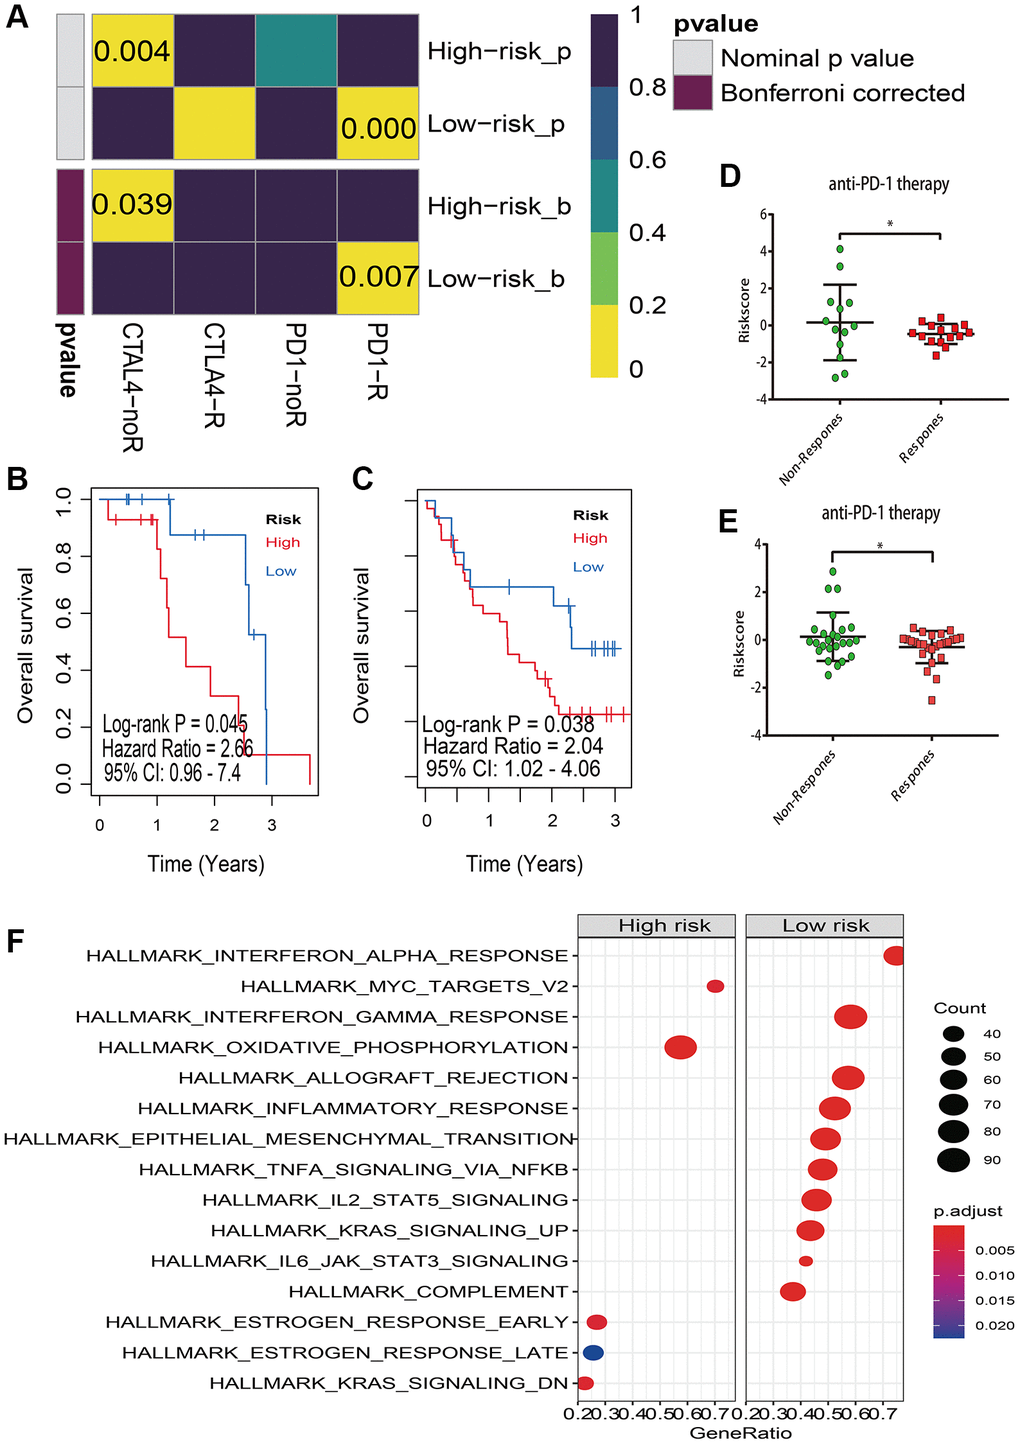 Immunotherapy response prediction. (A) Submap analysis manifested that low risk group could be more sensitive to the PD-1 inhibitor (Bonferroni-corrected P = 0.07), and high risk group are insensitive to anti-CTLA-4 therapy (Bonferroni corrected P = 0.039); (B) Kaplan–Meier survival analysis of risk model in Hugo et al melanoma study (accession number: GSE78220); (C) Kaplan–Meier survival analysis of risk model in Riaz et al melanoma study (accession number: GSE91061); (D) The risk score distribution of anti-PD-1 therapy between response and non-response in GSE78220; (E) The risk score distribution of anti-PD-1 therapy between response and non-response in GSE91061; (F) Gene set enrichment analysis (GSEA) of high vs low risk scores groups in cancer hallmark pathways.